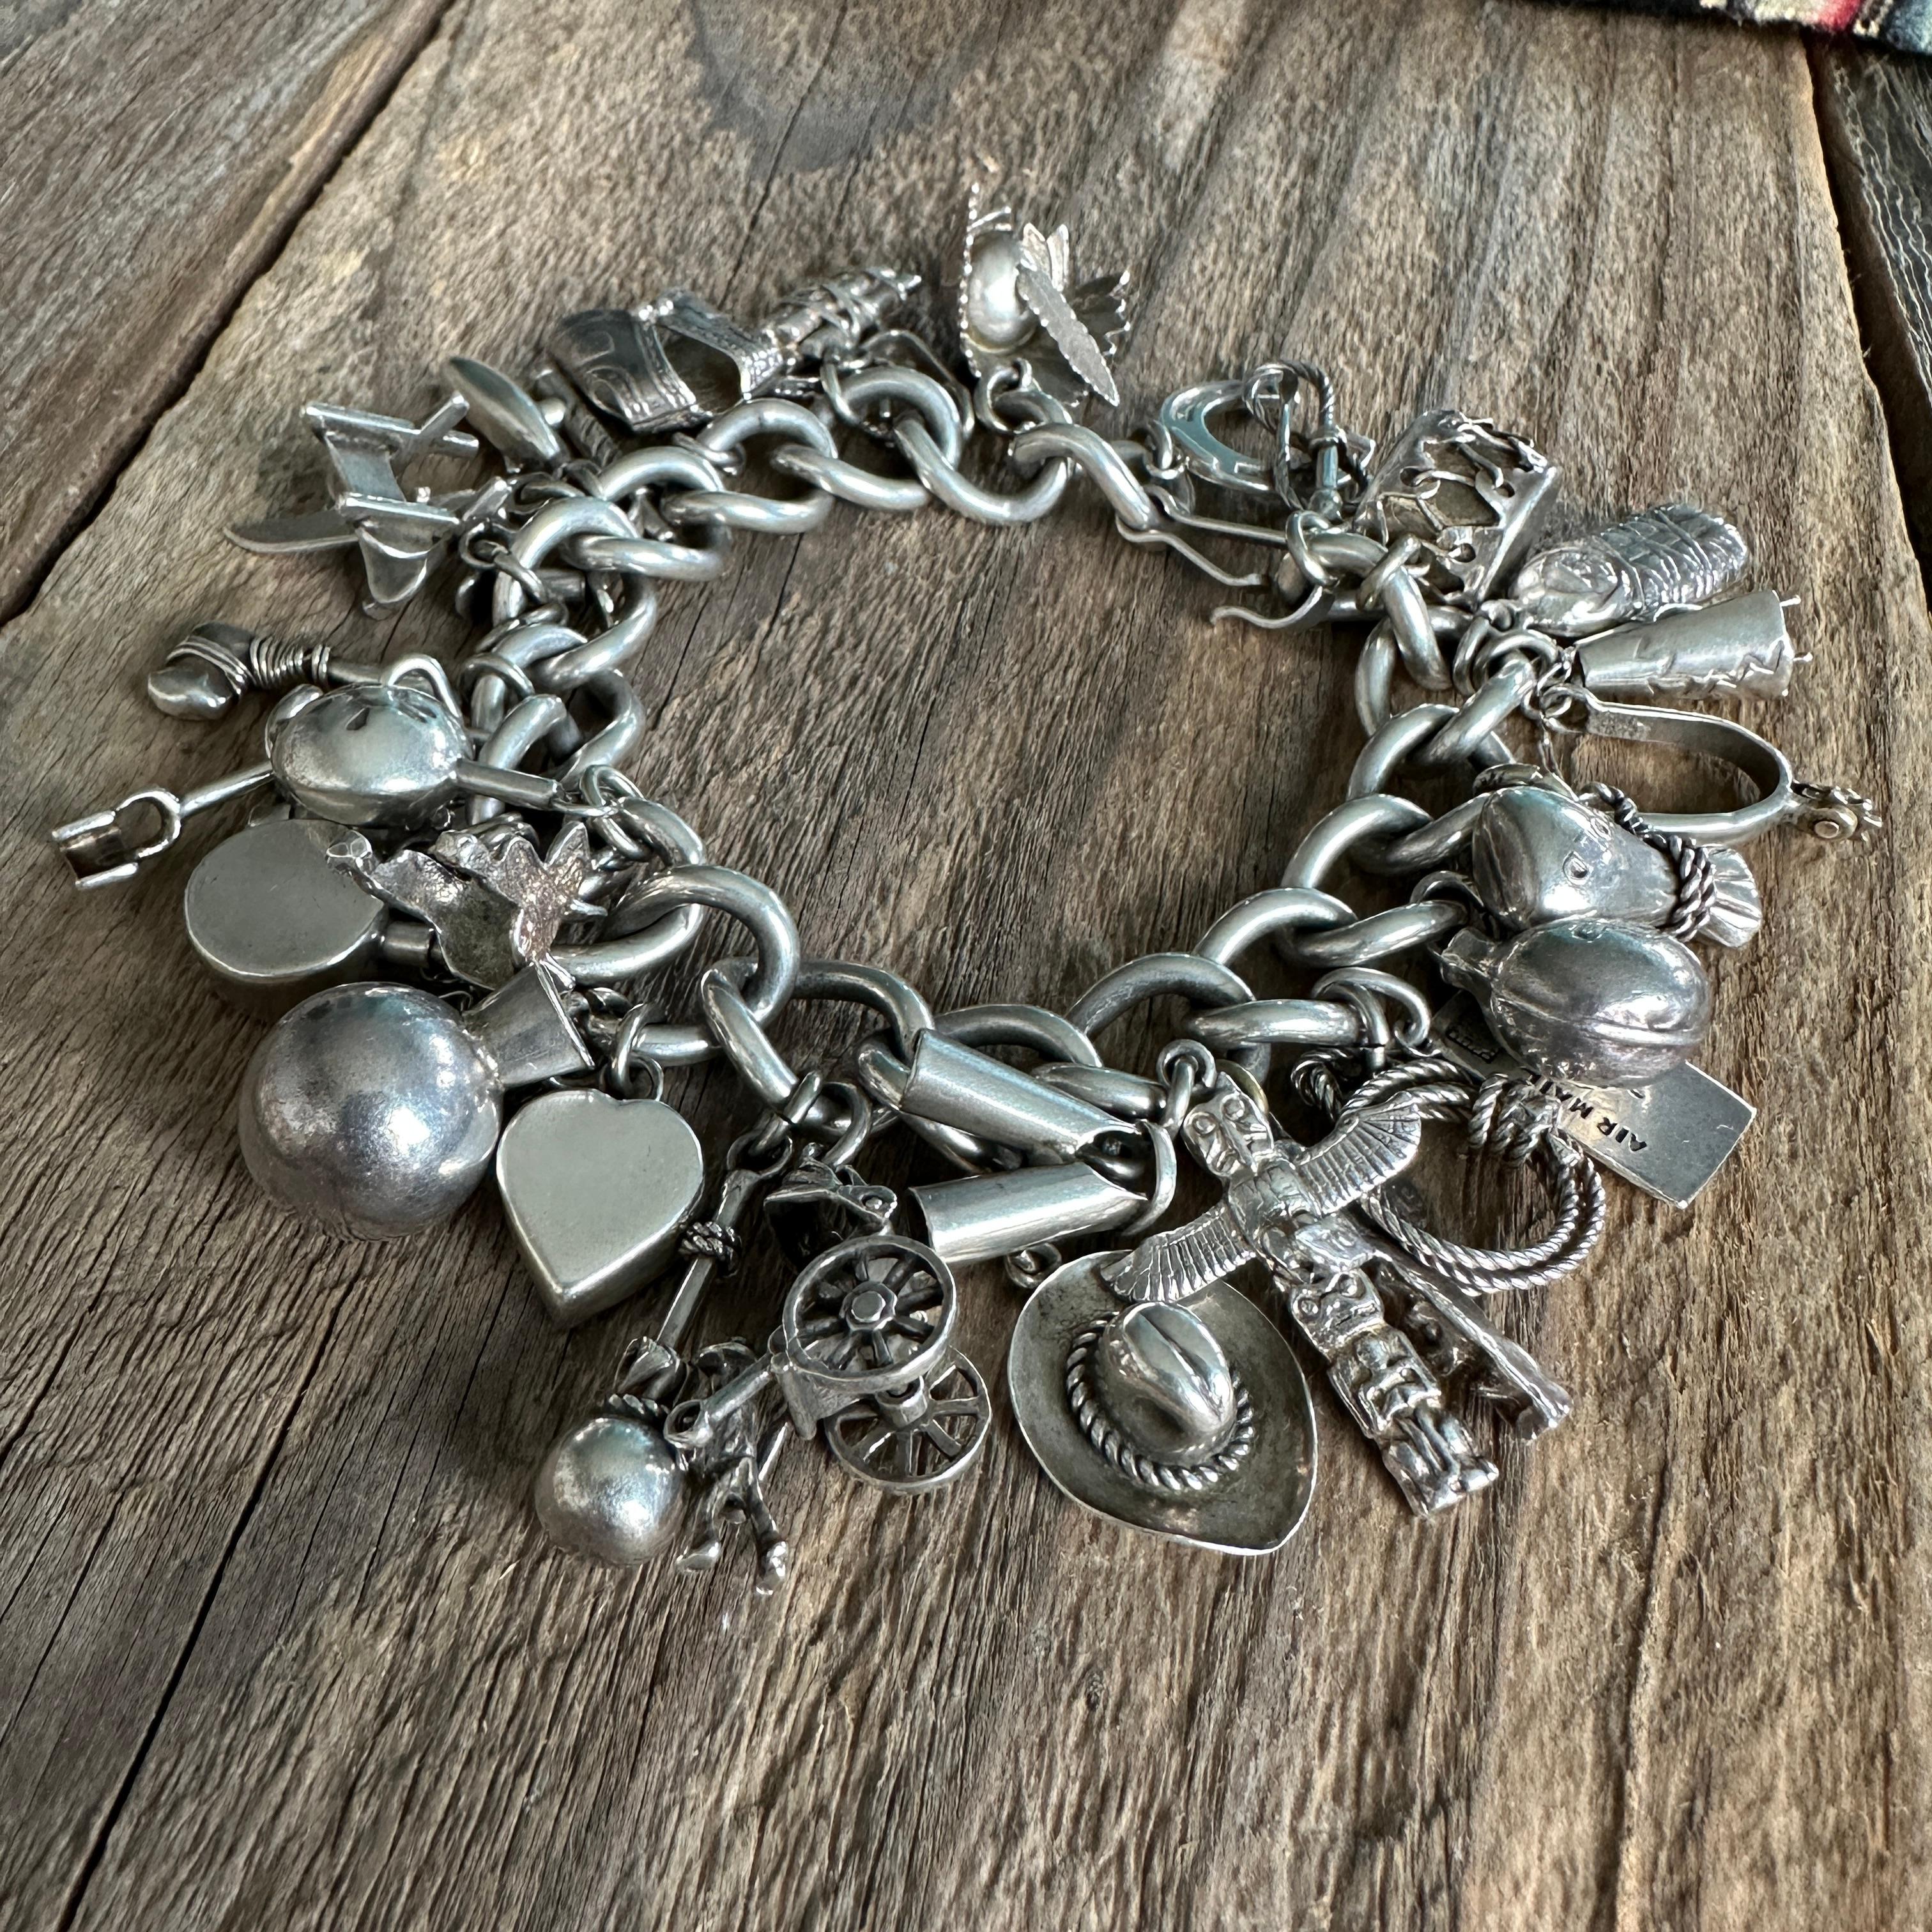 Details:
Sweet western themed 1900-1940's vintage charm bracelet in sterling silver. A great collection of (33) silver charms including horseshoe, cowboy hat, cowboy boot, strirrups, chaps, ropes, feathered headdress, totem pole, papoose, teepee,